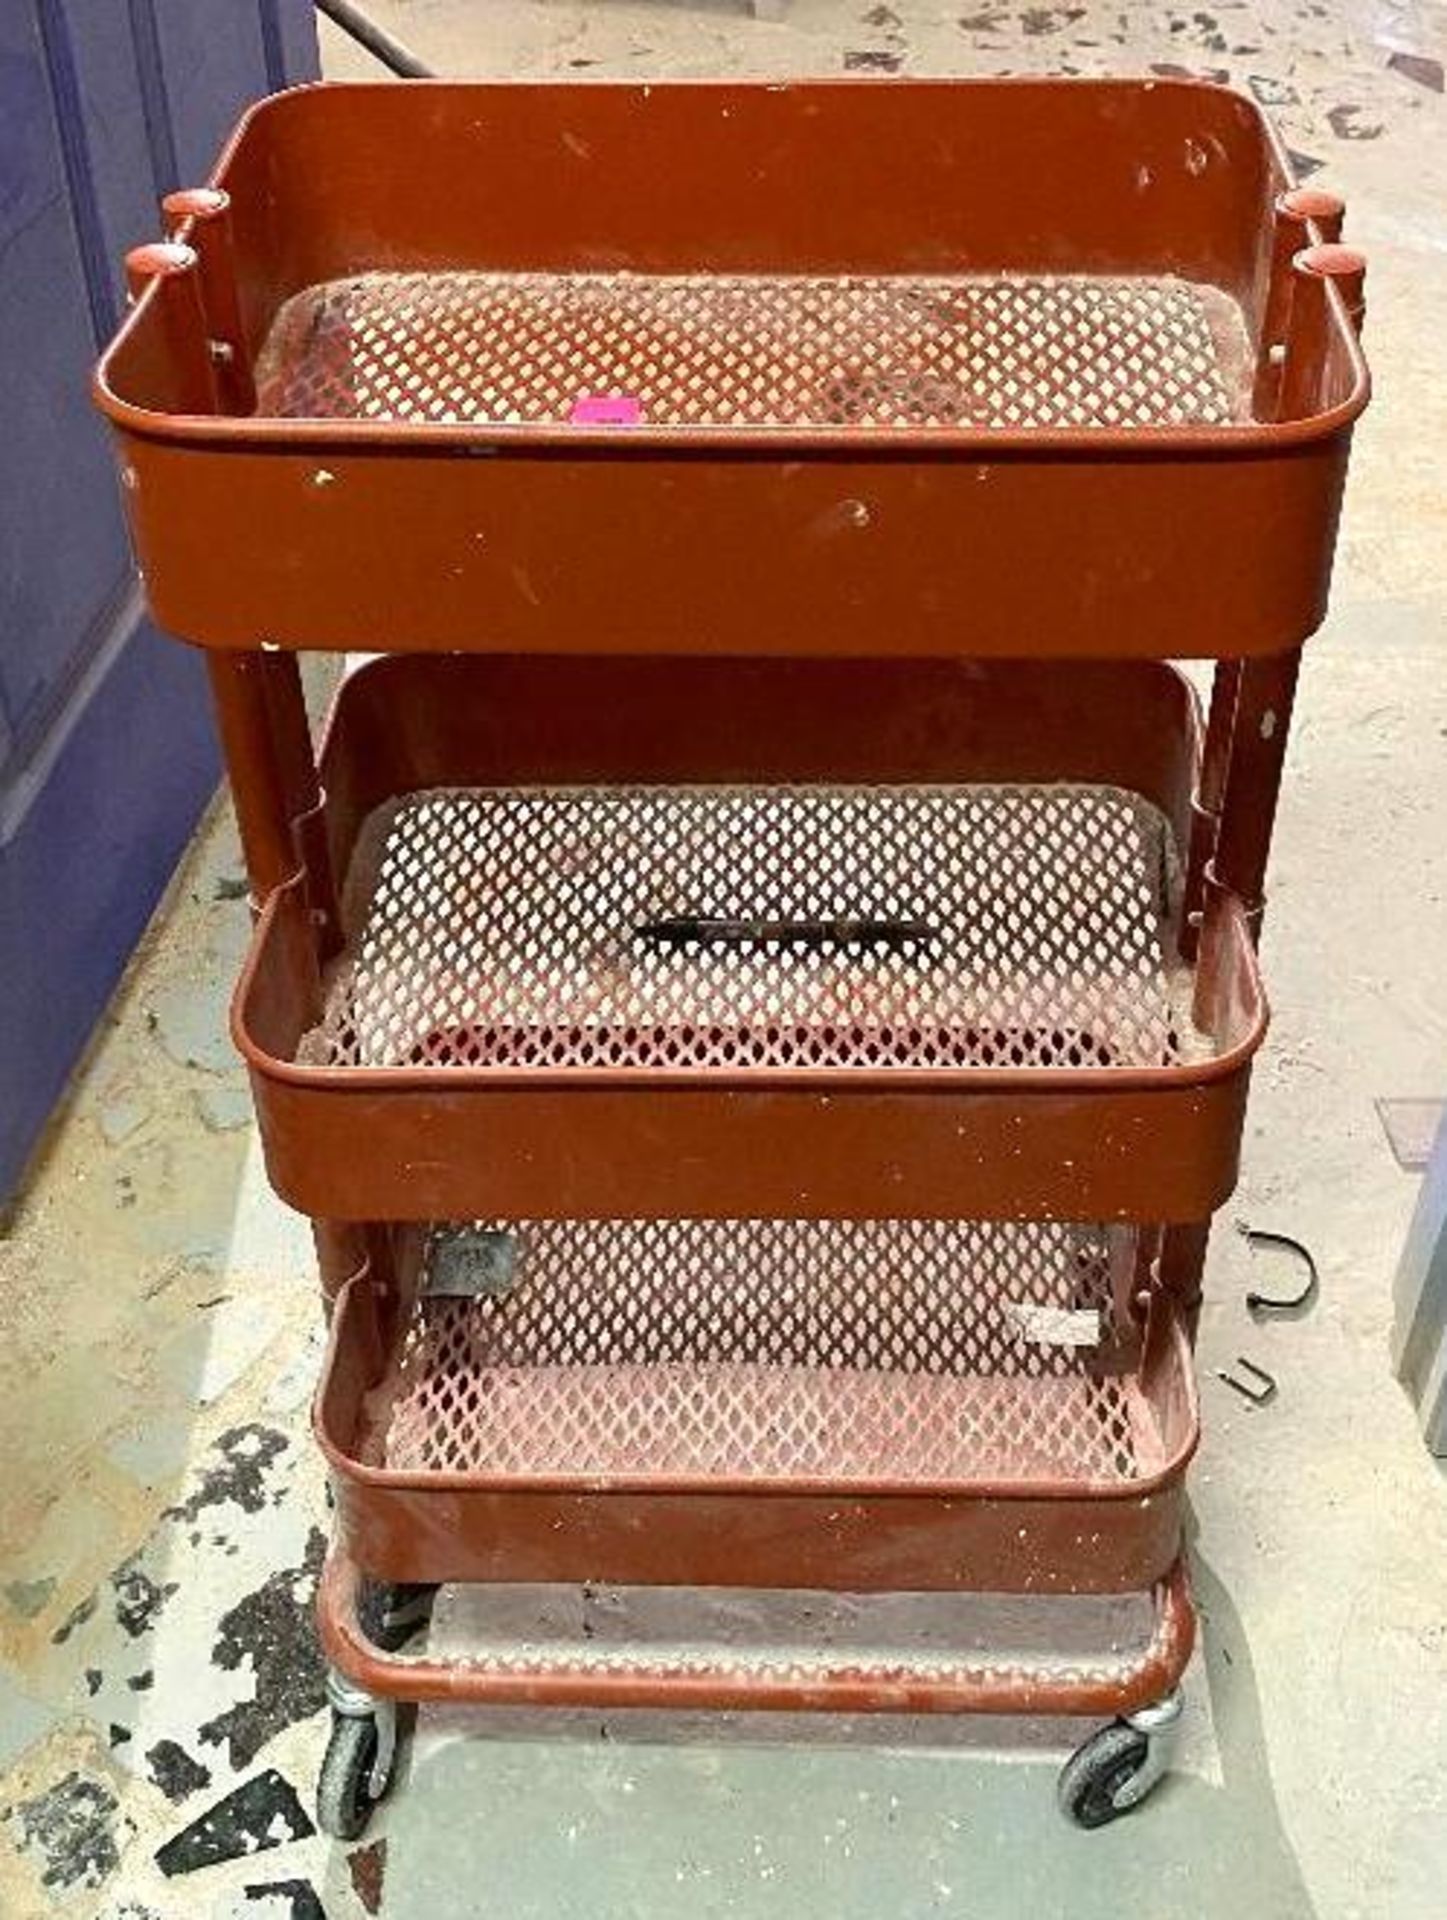 DESCRIPTION (2) 16" X 12" X 30" 3-TIER RACK ON CASTERS LOCATION BASEMENT: TOOL ROOM THIS LOT IS SOLD